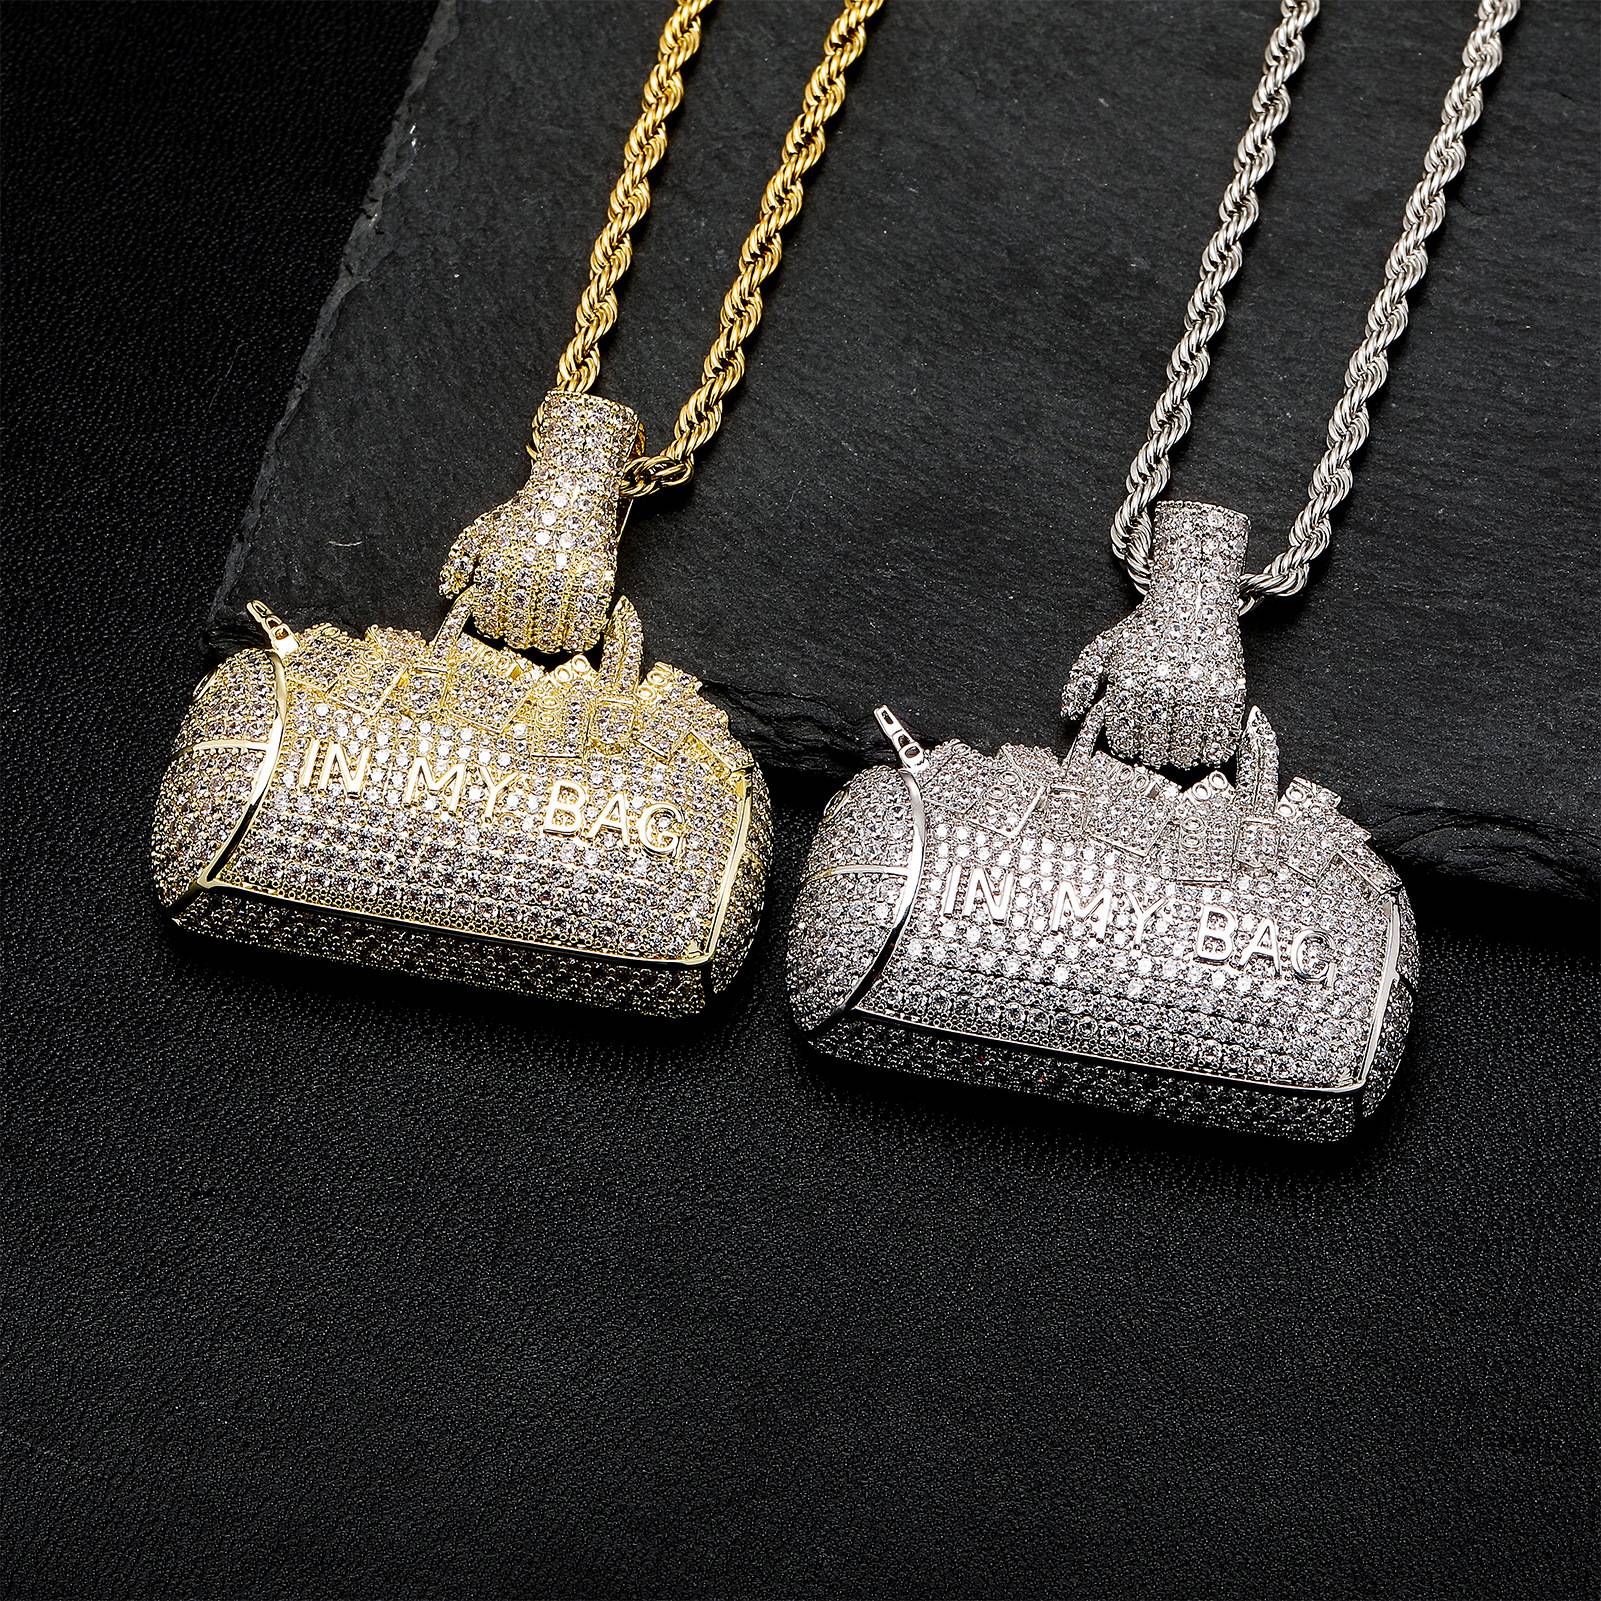  New Iced Out Full 3A Cubic Zircon Pendant Personality Handbag Pendant Necklace For Jewelry